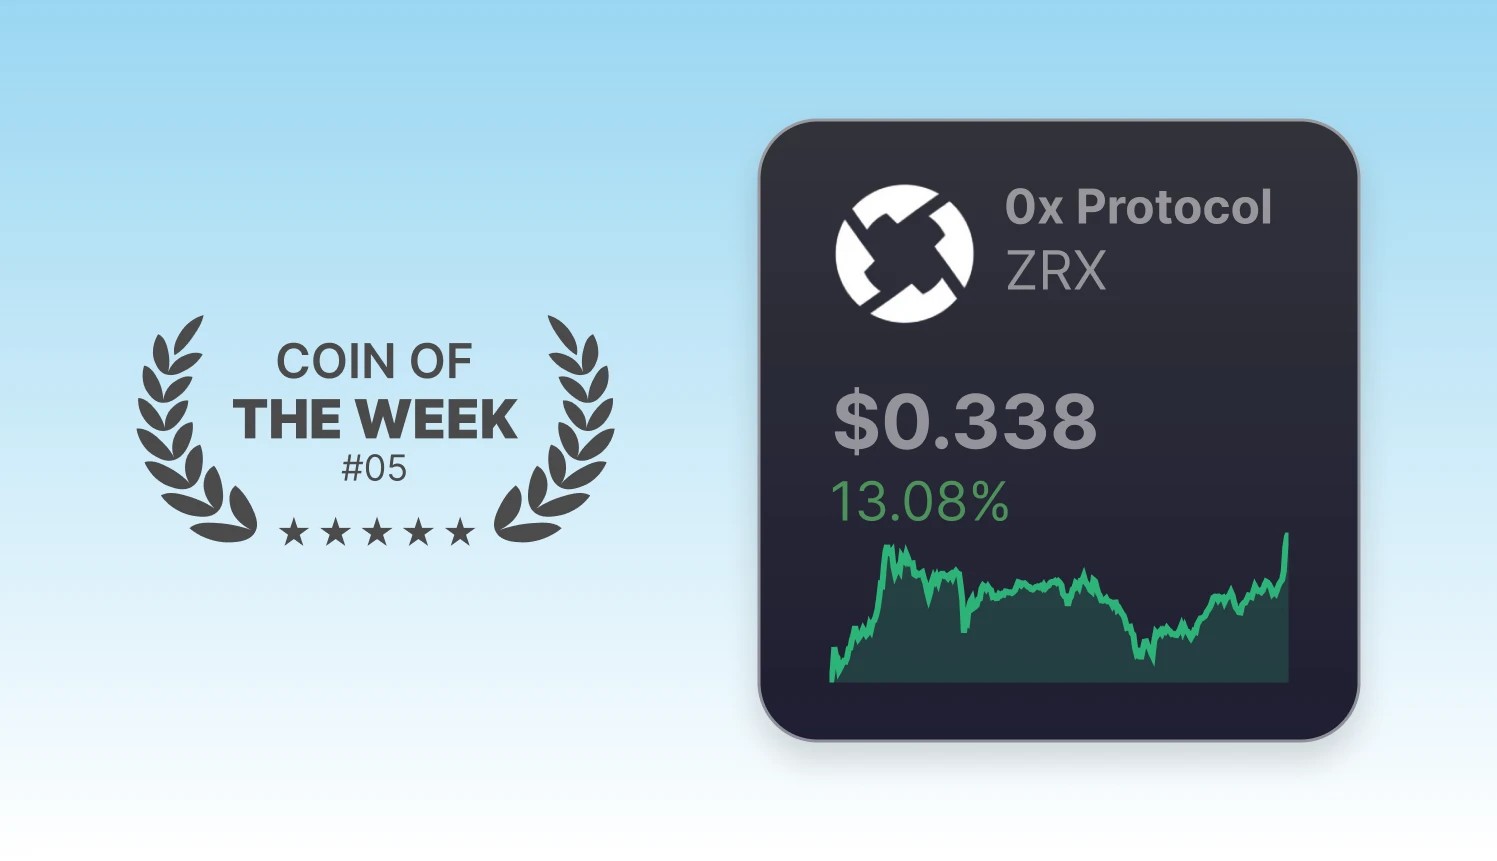 Coin Of The Week - ZRX - Week 05